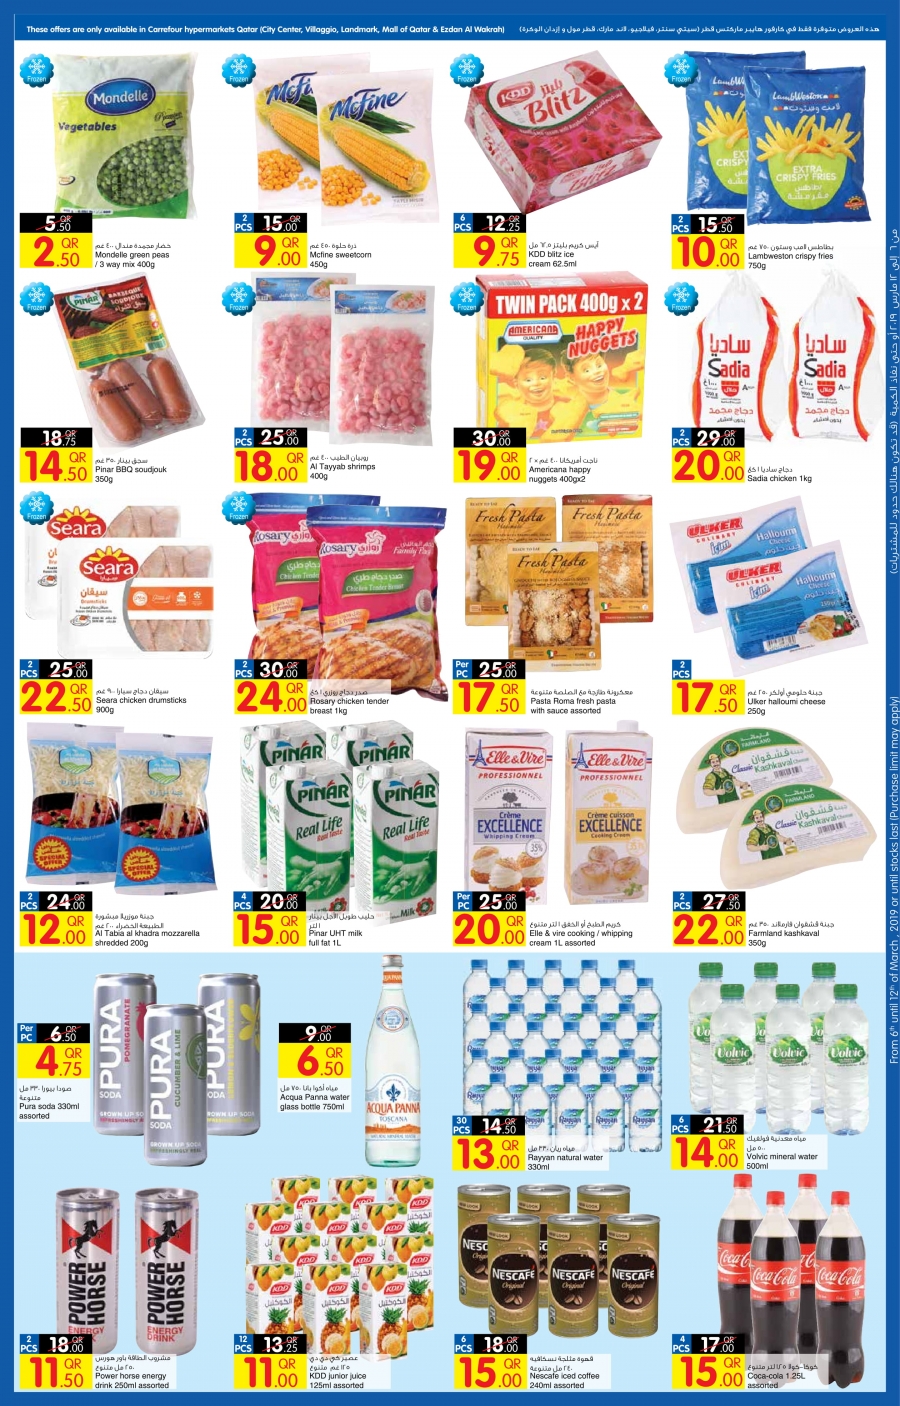 Carrefour Crazy Prices Offers